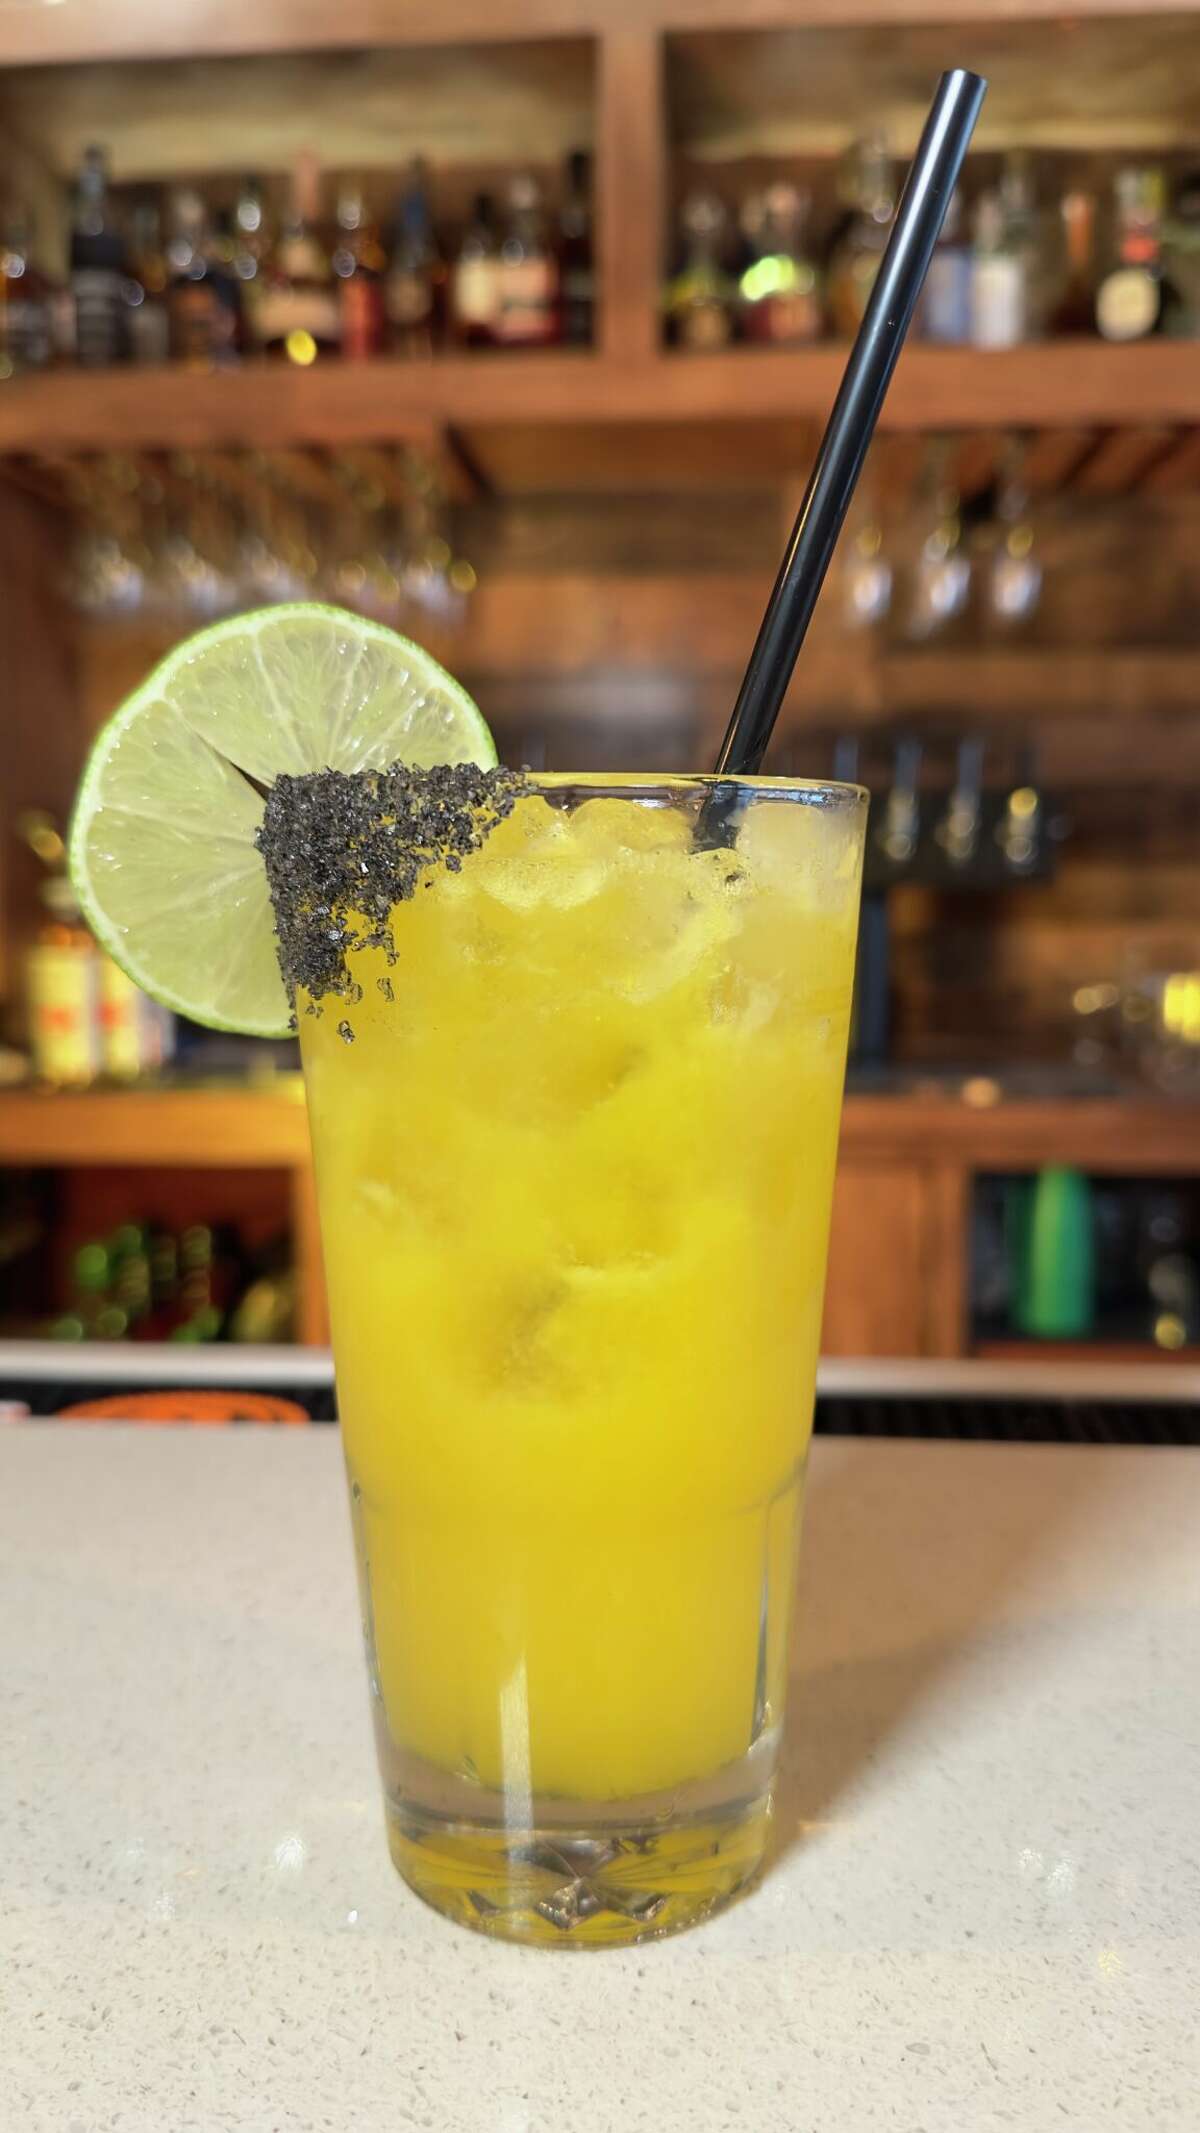 At Americana in West Hartford, the cocktail menu has early hits, managers said, like a "Casarita" with Casamigos reposado tequila and with a mango margarita featuring Lunazul.